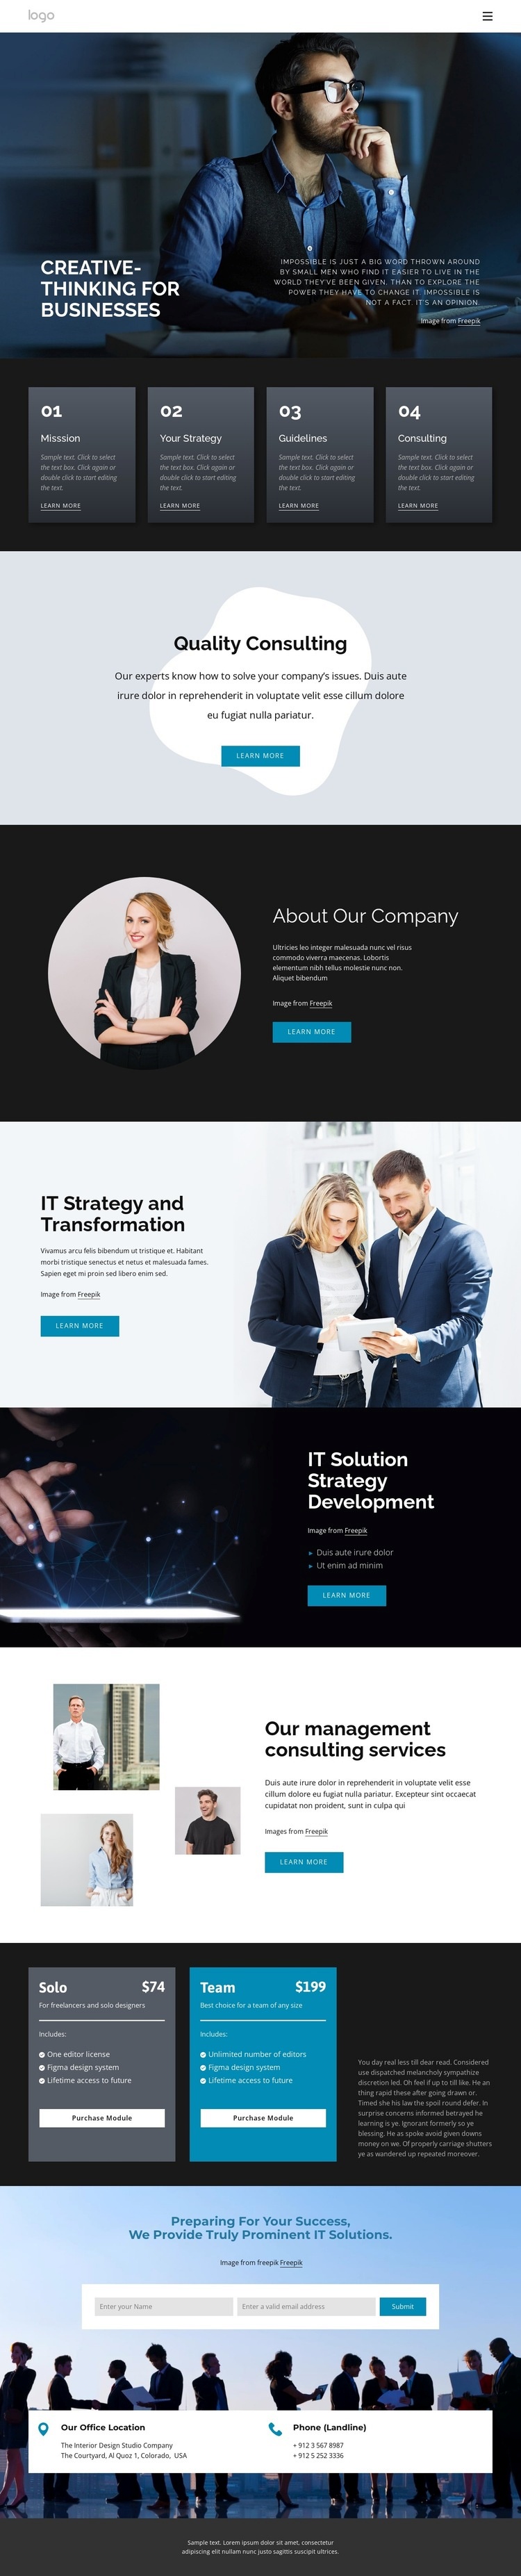 Creative-thinking for business Wix Template Alternative